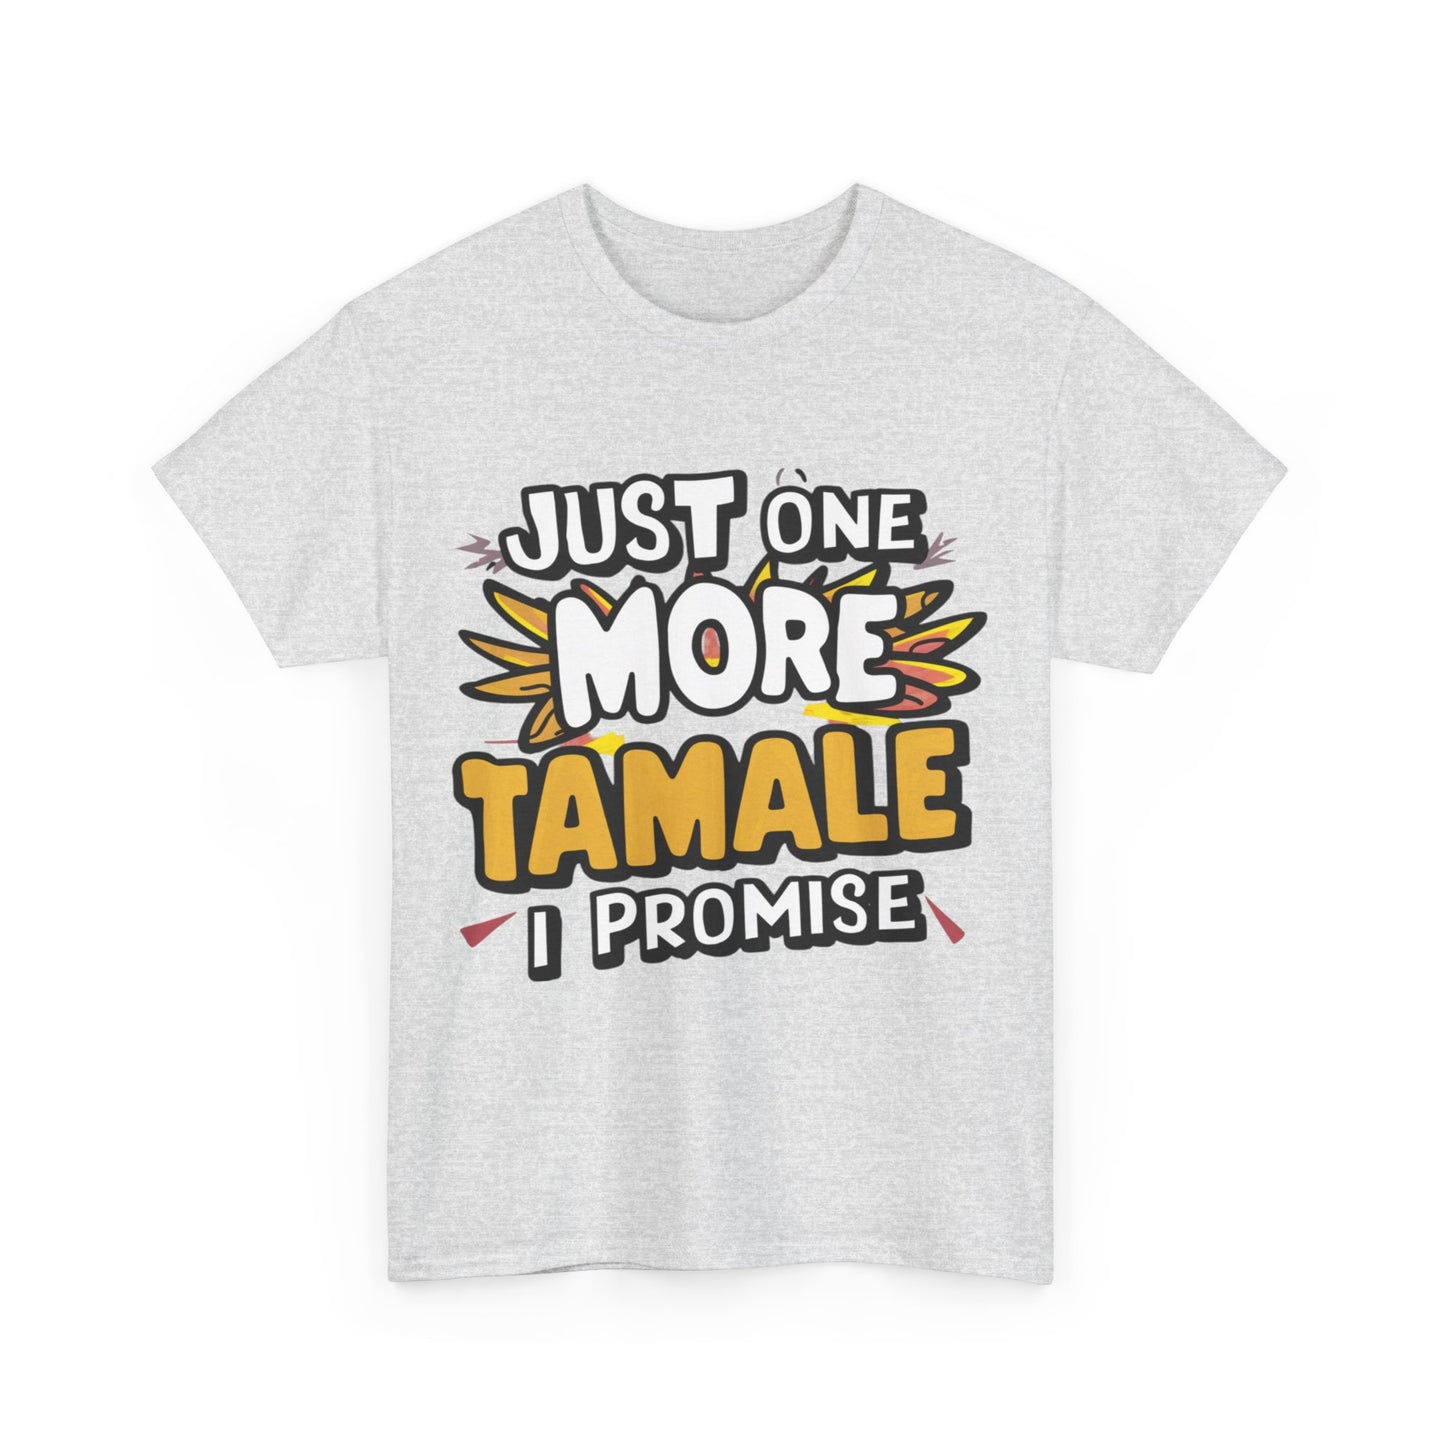 Just One More Tamale I Promise Mexican Food Graphic Unisex Heavy Cotton Tee Cotton Funny Humorous Graphic Soft Premium Unisex Men Women Ash T-shirt Birthday Gift-51